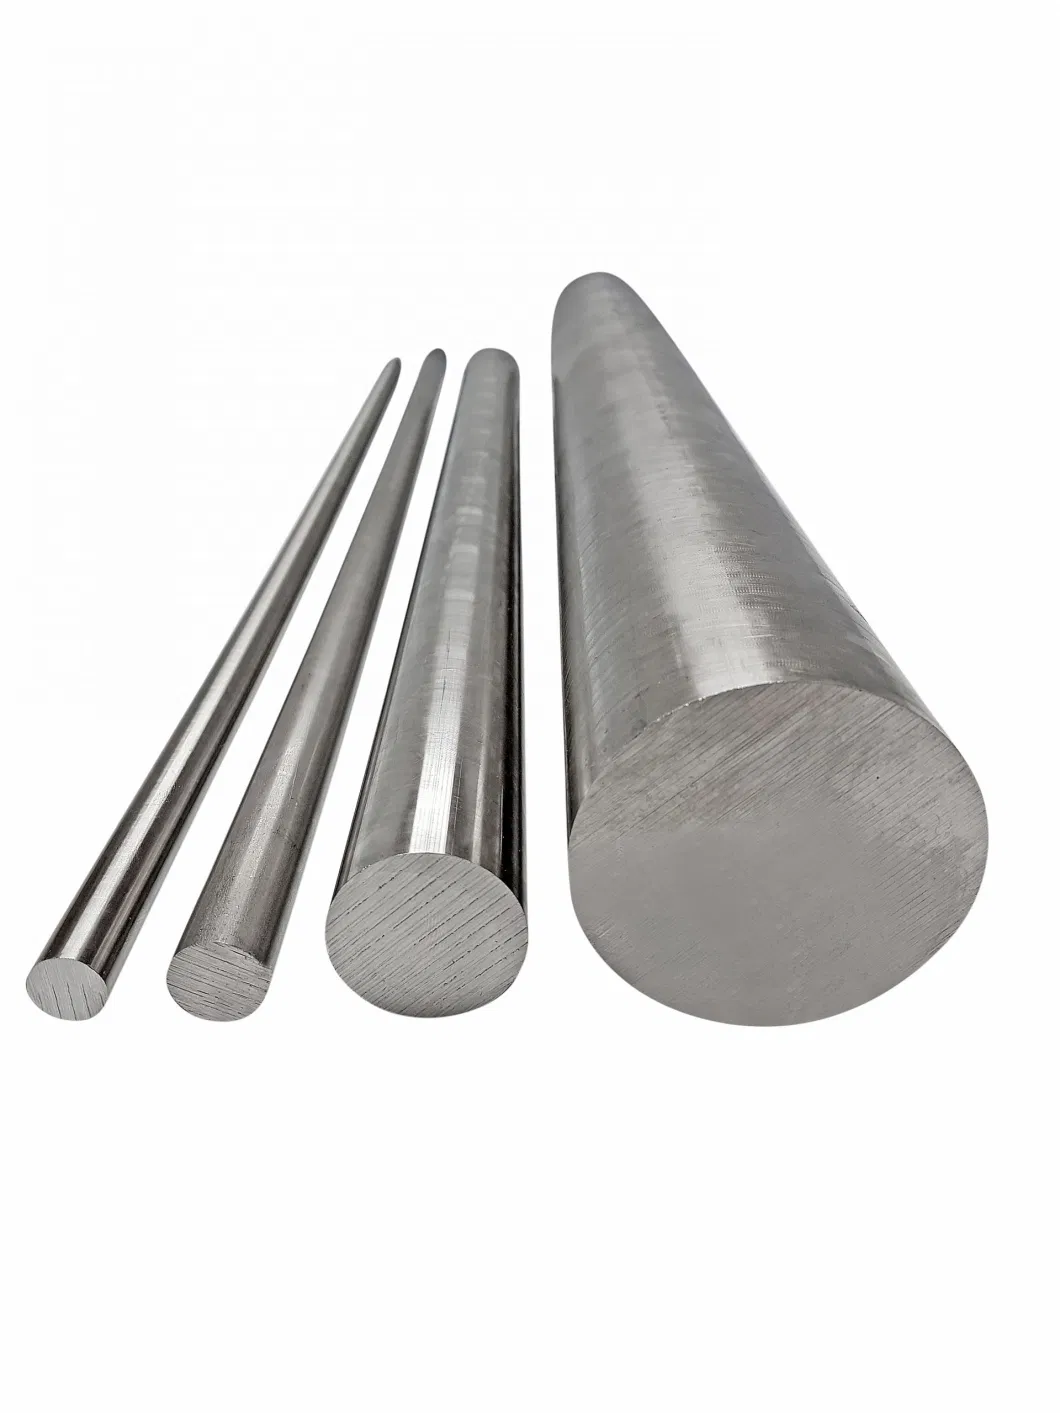 Stainless Steel Flat Rod Bright Peeled Polishing Hairline Stainless Steel Round Rod